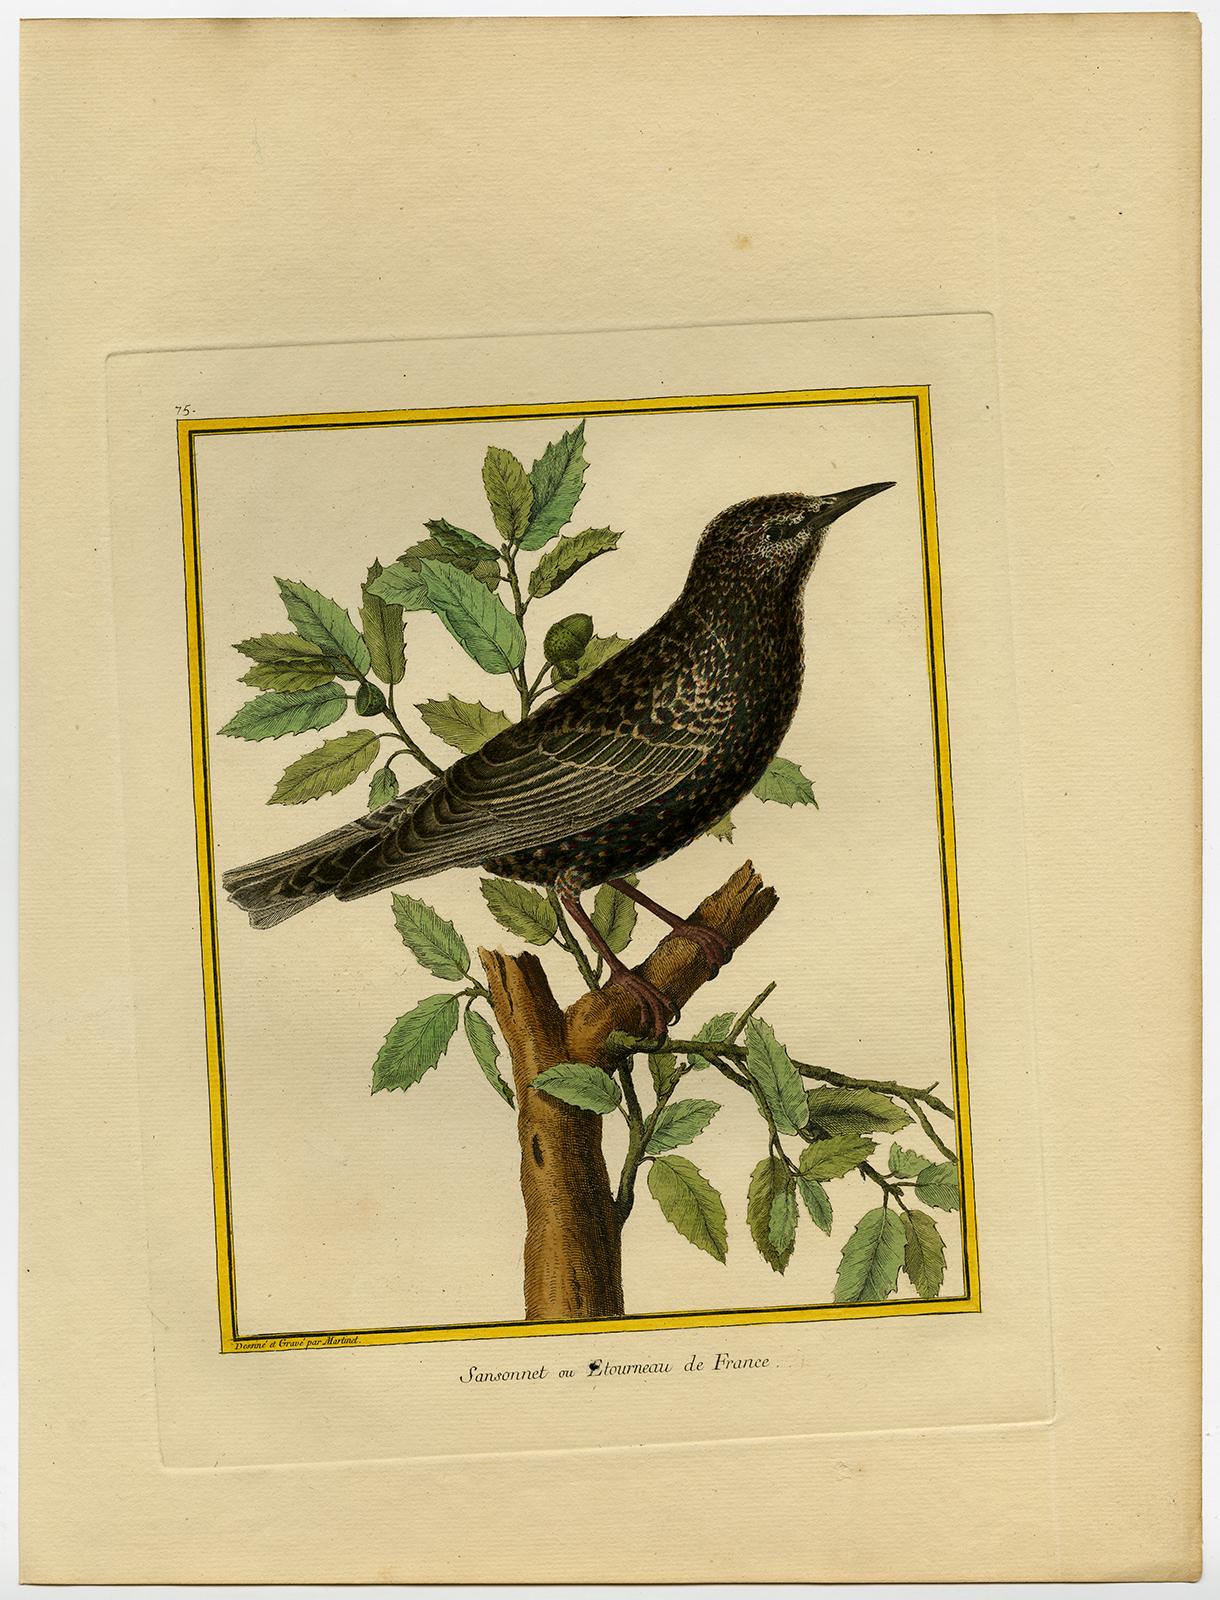 Starling by Martinet - Handcoloured engraving - 18th century - Print by Francois Nicolas Martinet